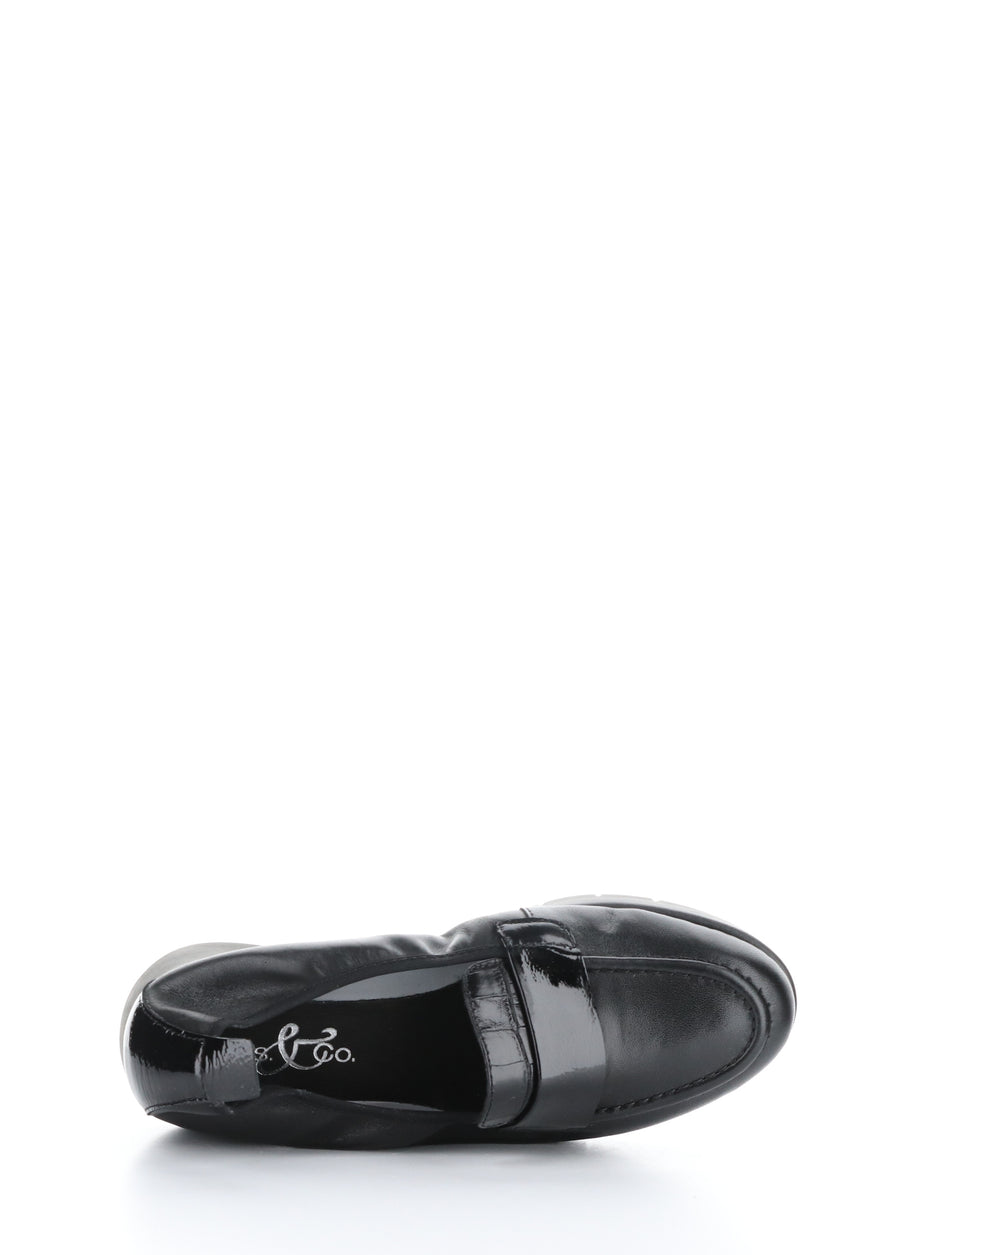 SCREEN MIXED BLACK Round Toe Shoes